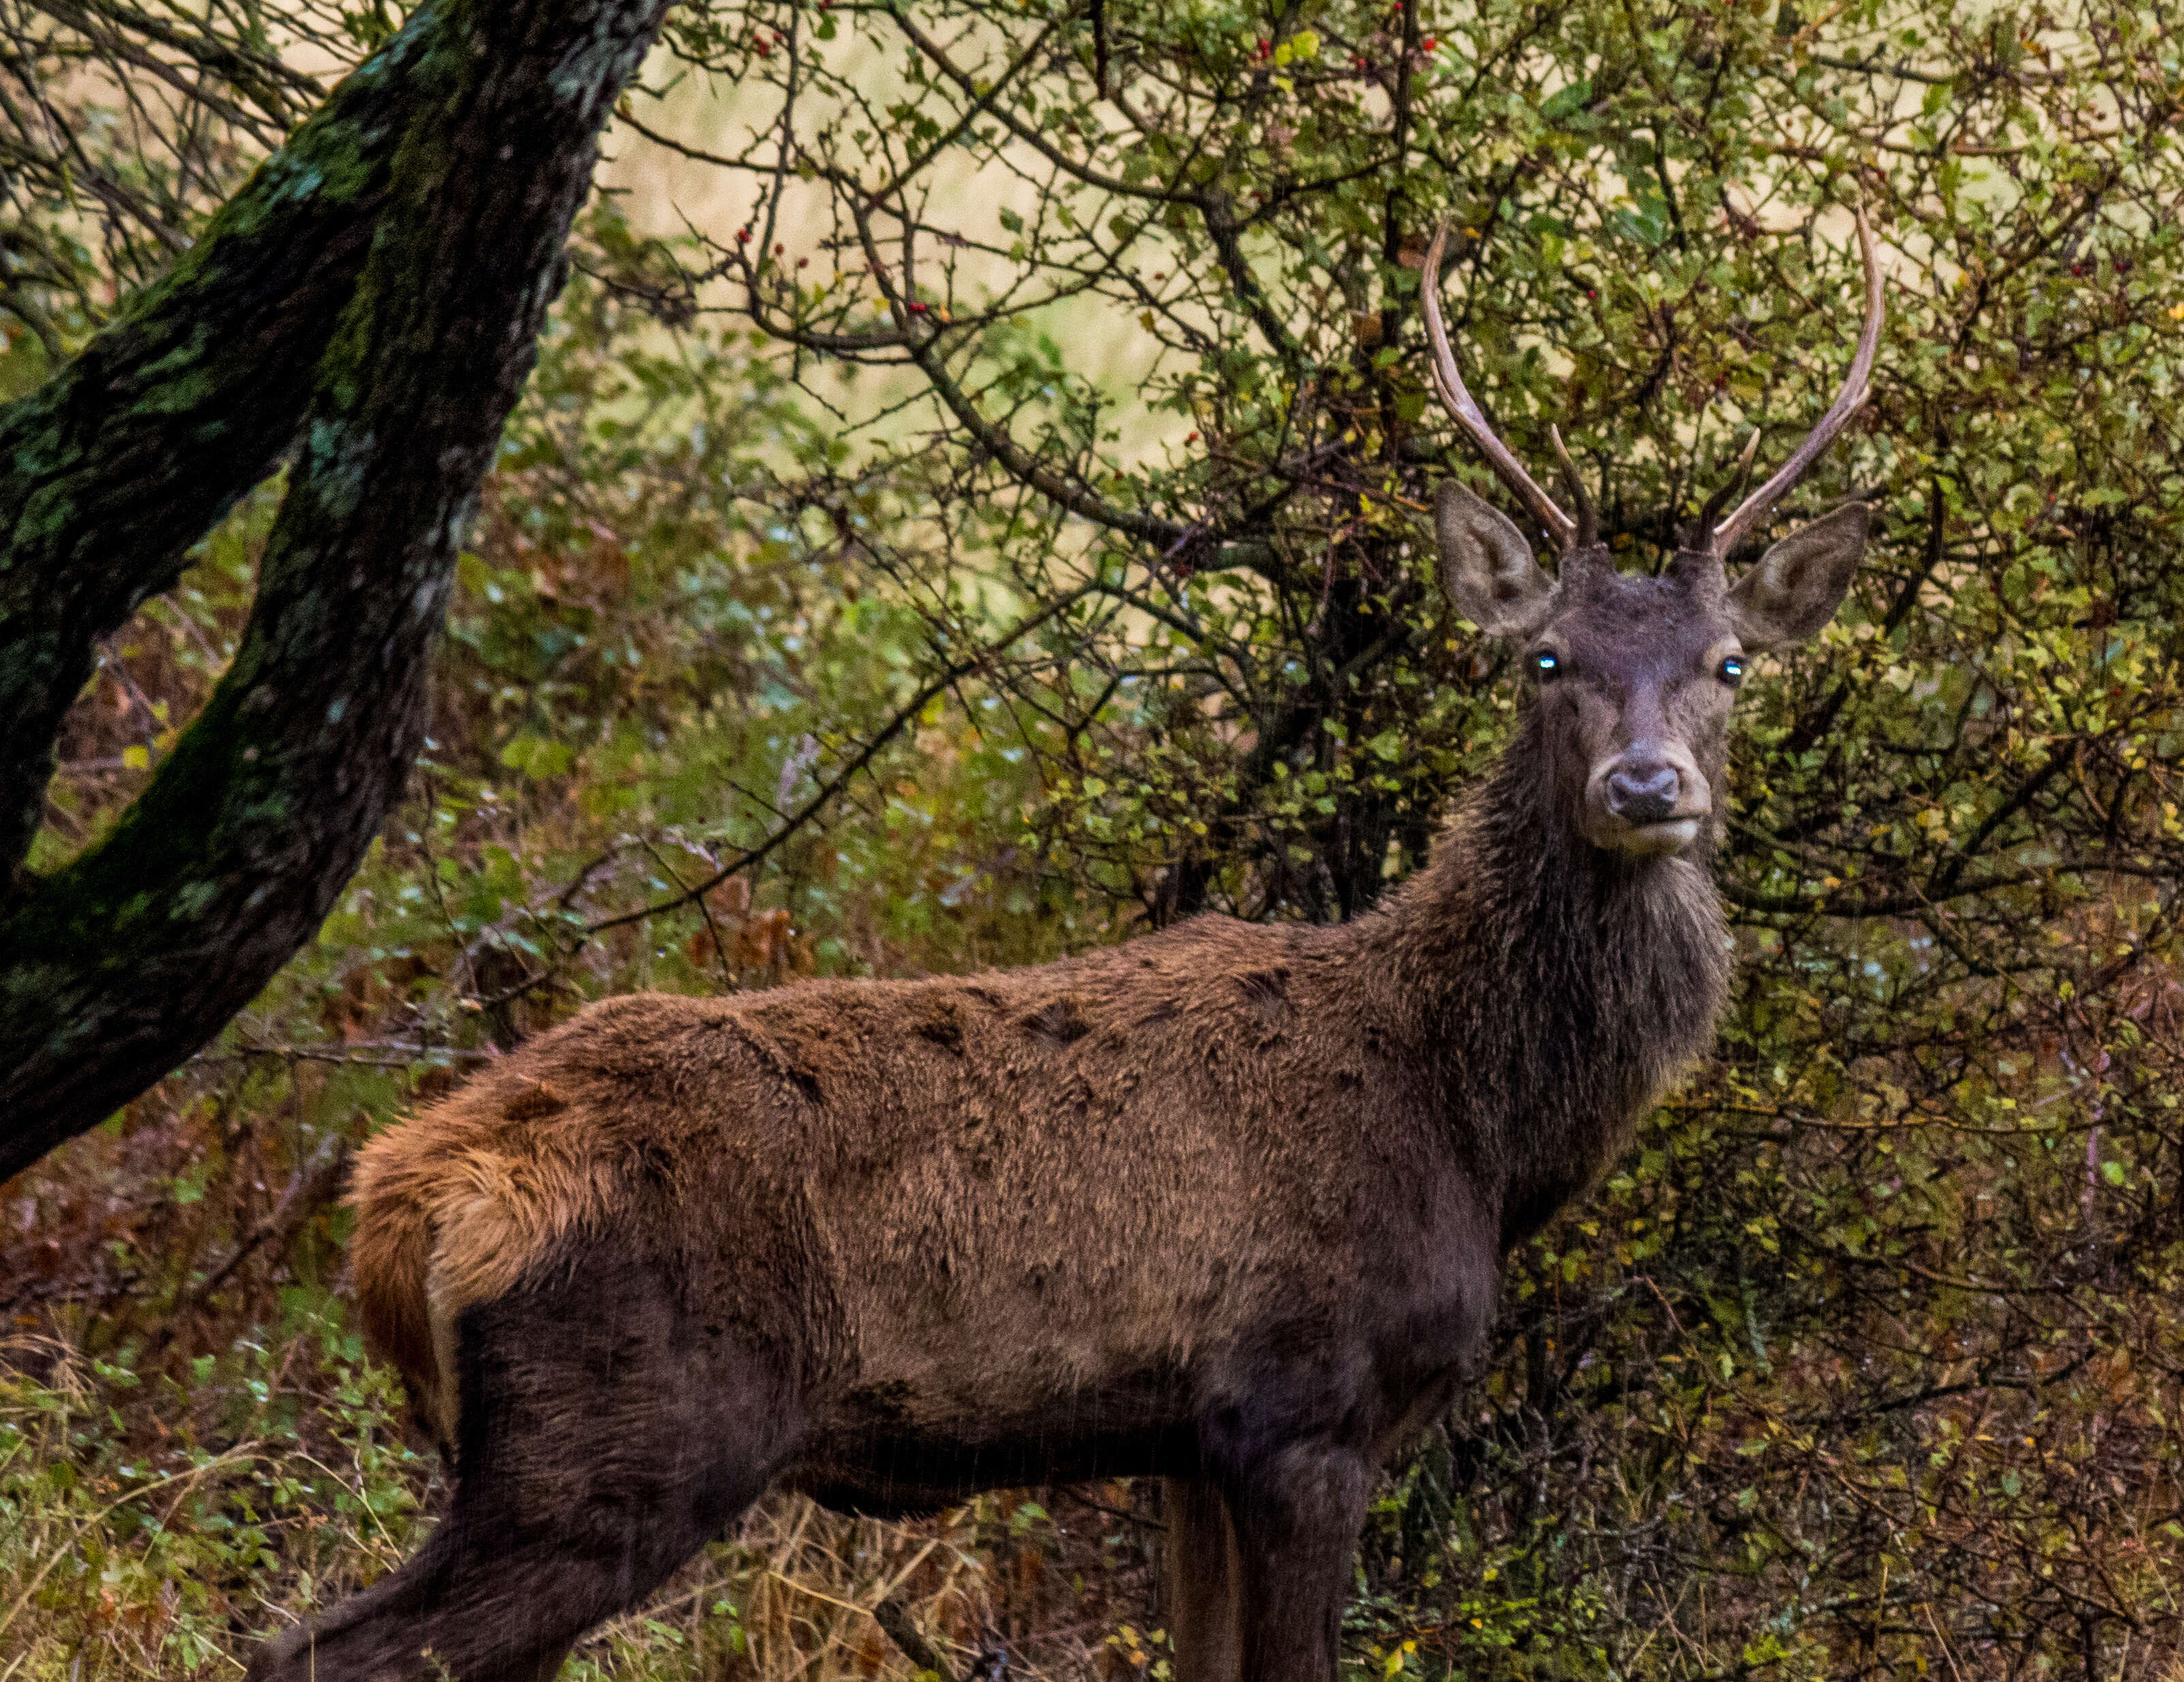 Image of Barbary stag